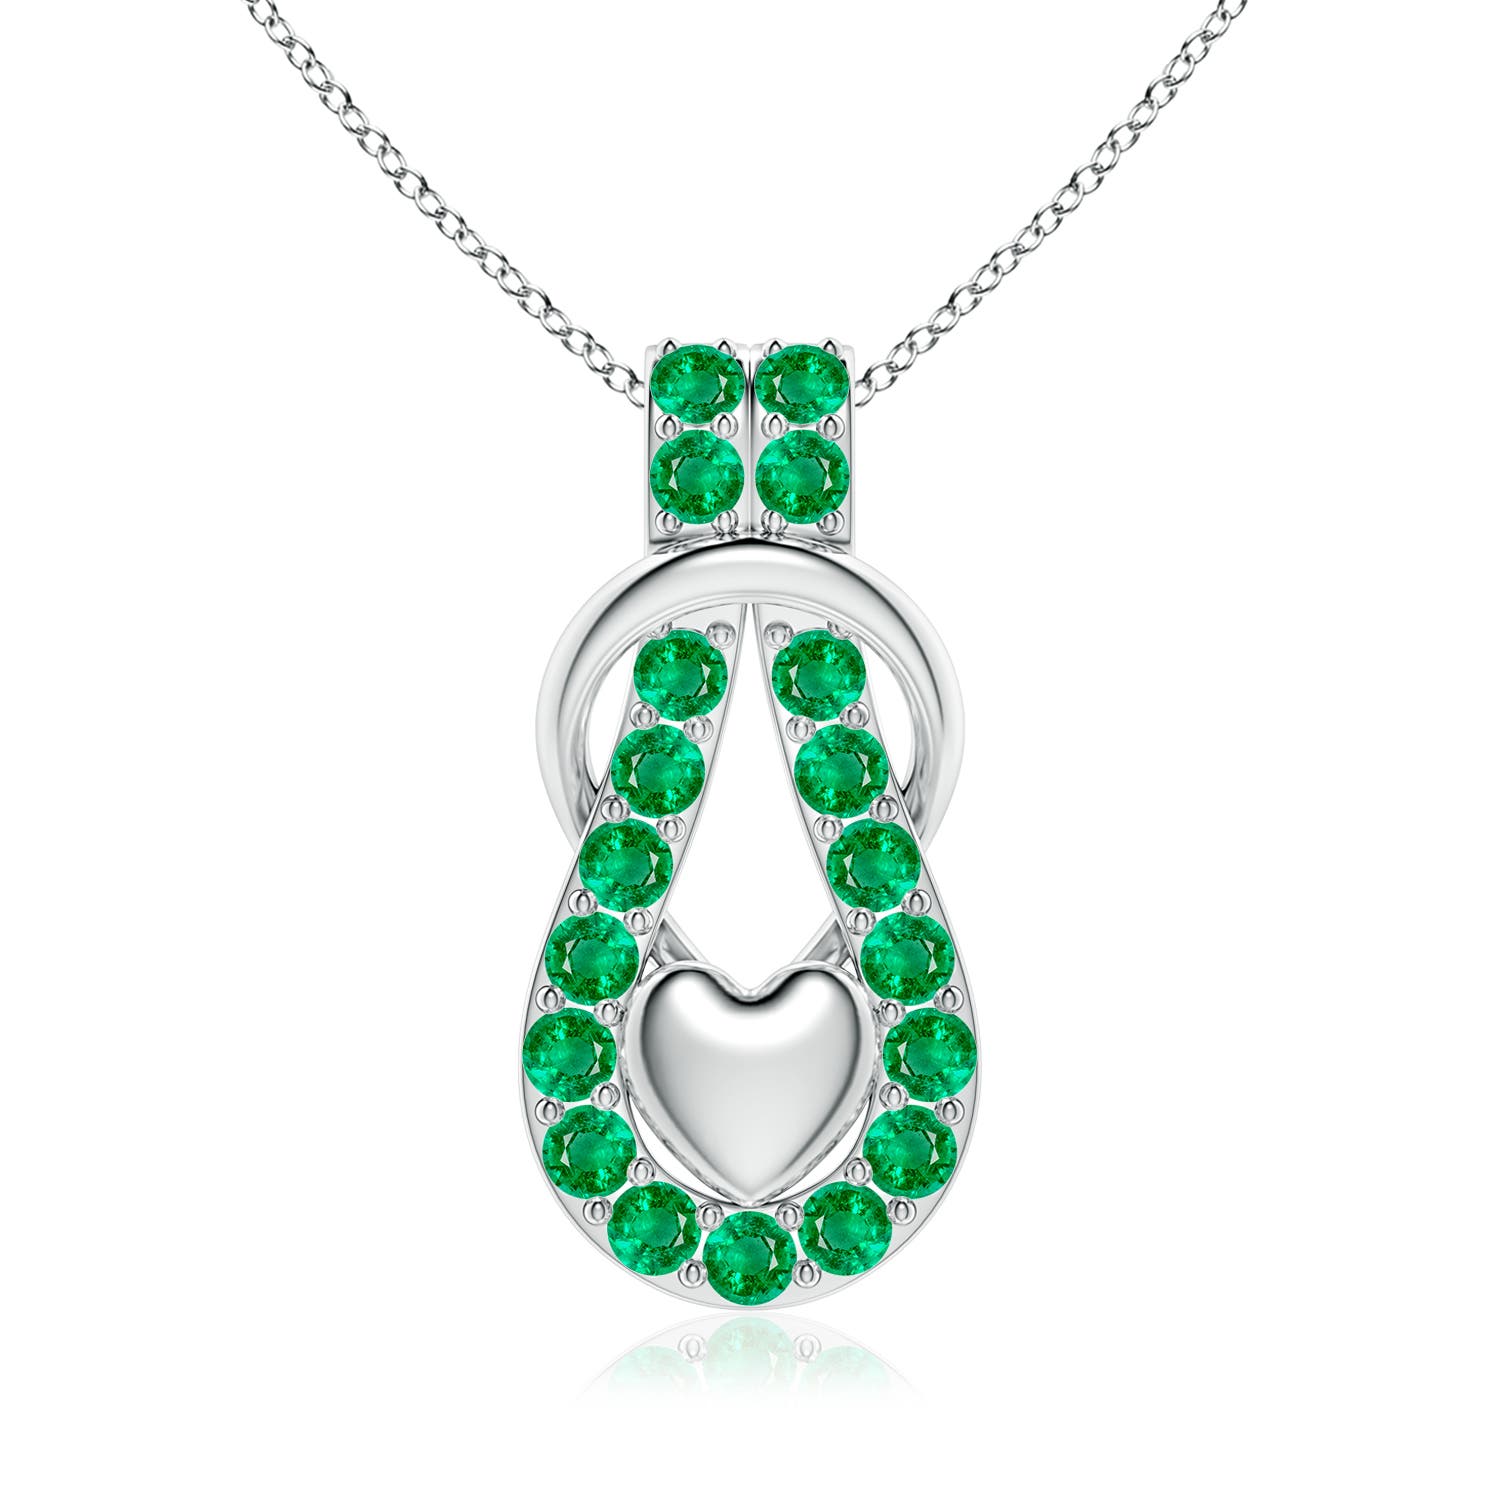 AAA - Emerald / 2.85 CT / 18 KT White Gold